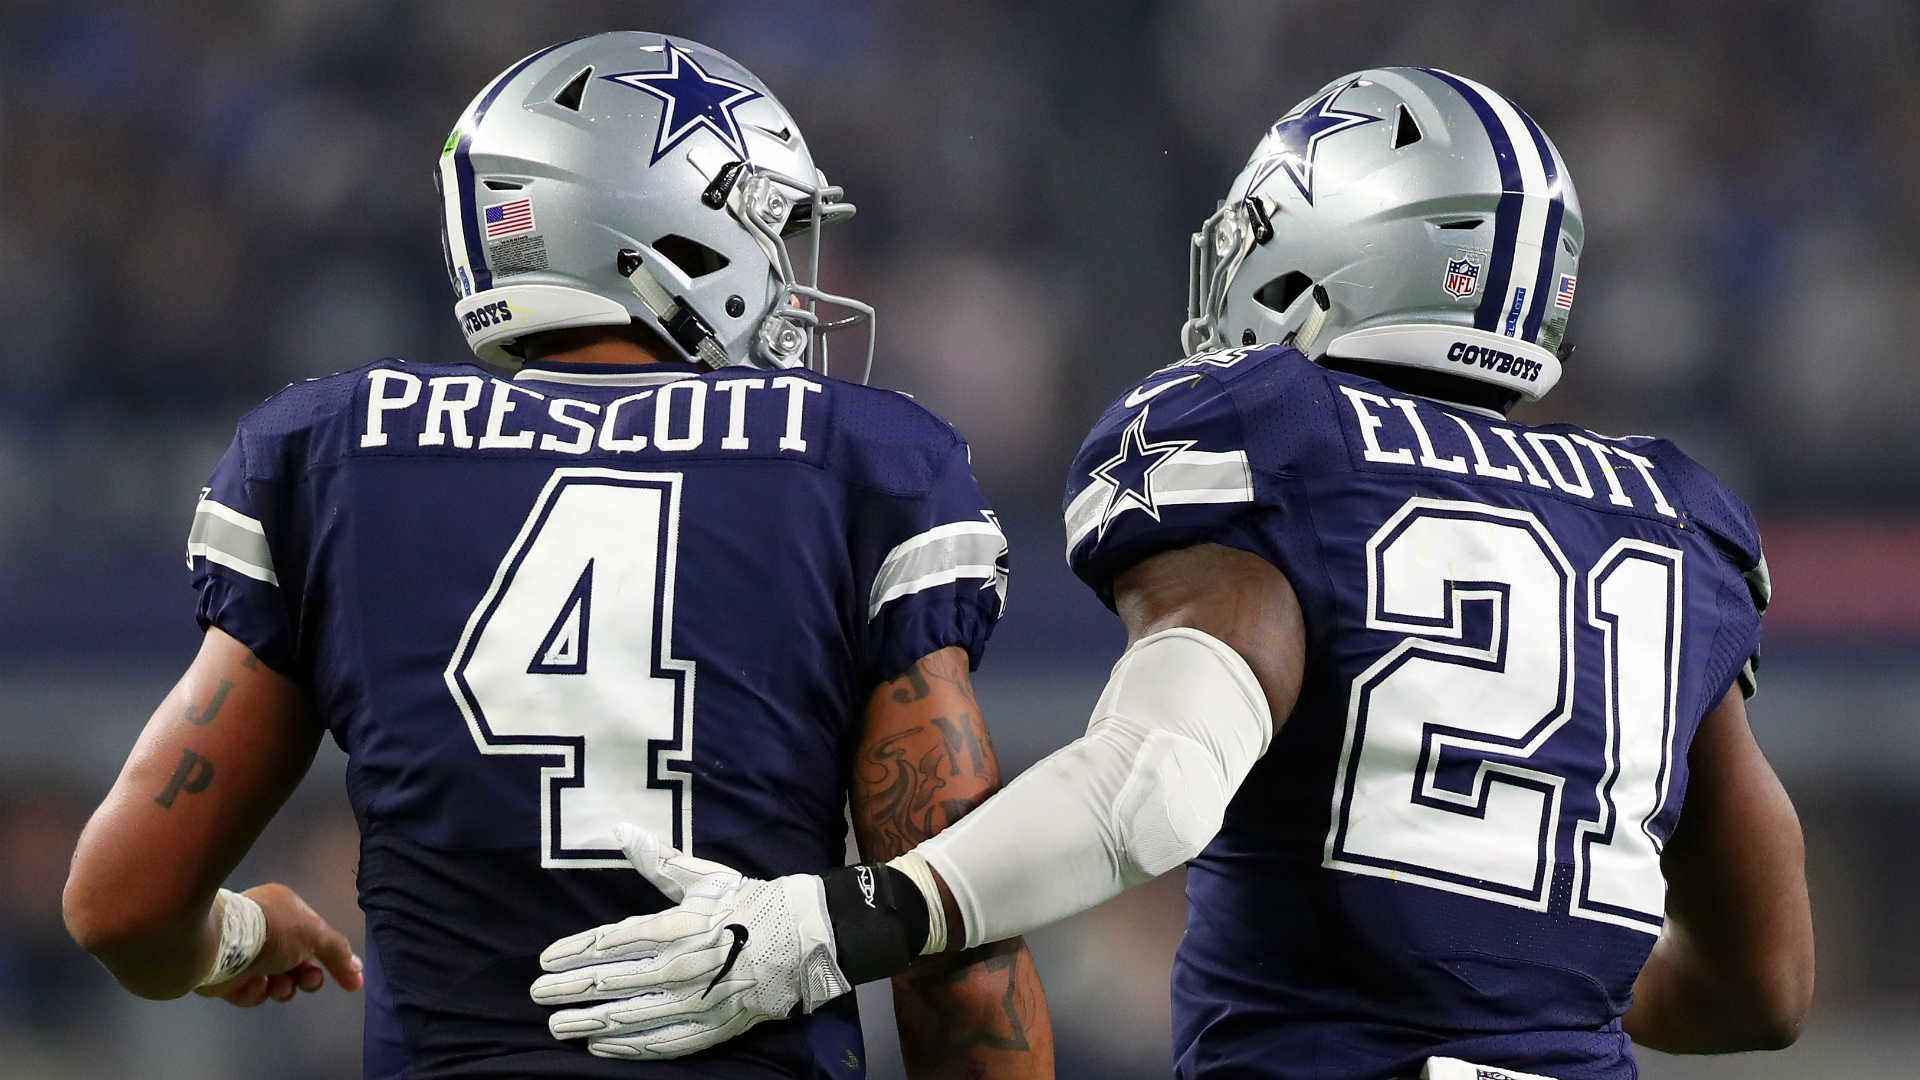 Dallas Cowboys Comprise 40% Of 2016's Top Selling NFL Jerseys ⋆